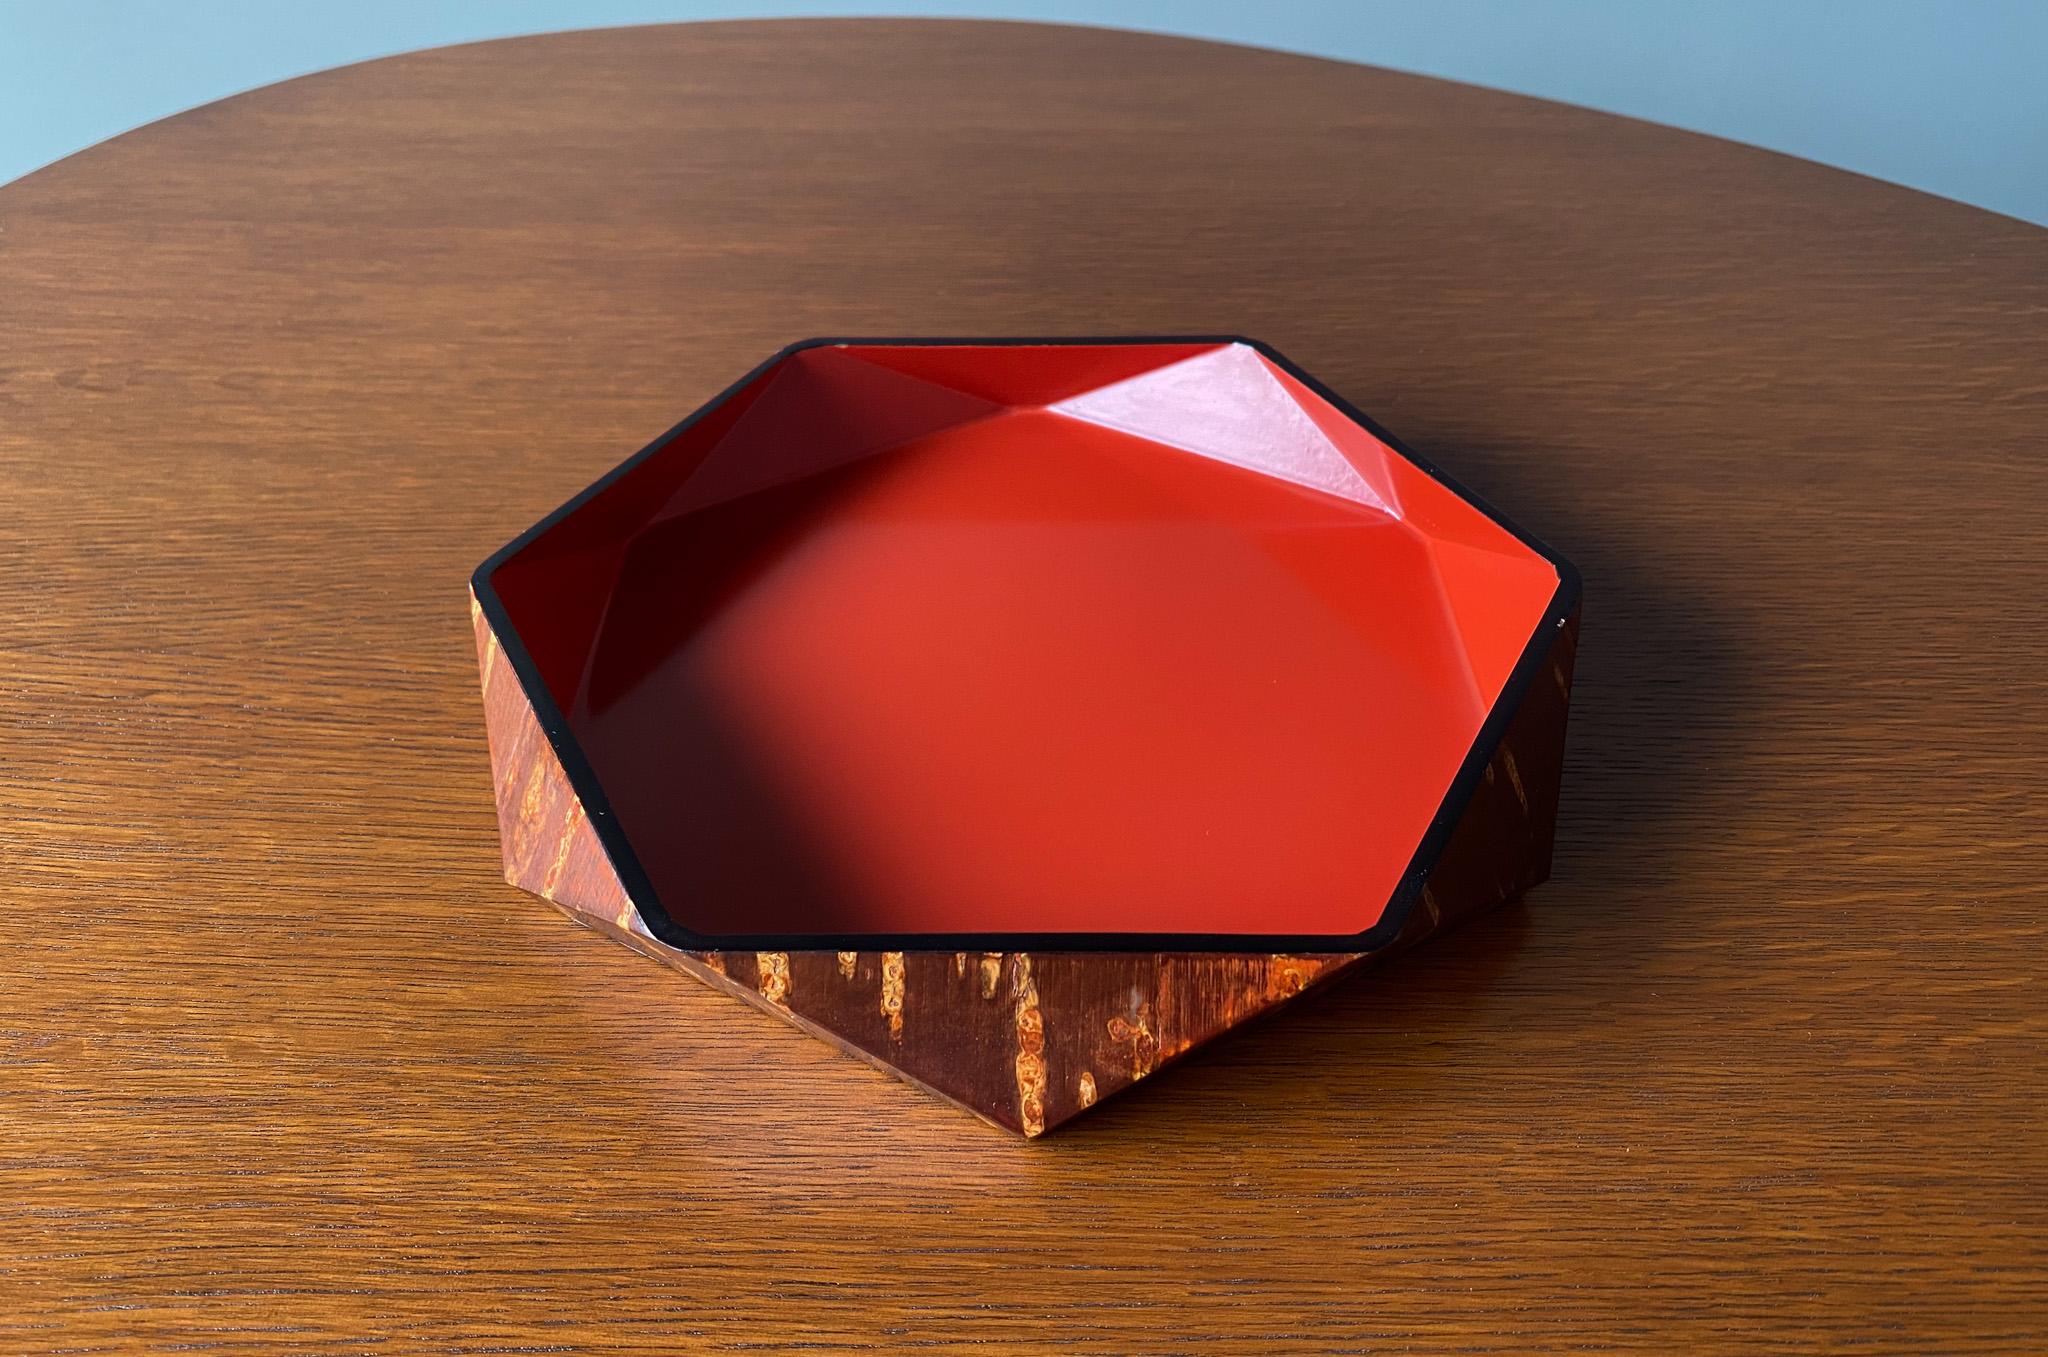 Kusachu Hexagonal Cherry Bark Bowl / Tray, Japan, 20th Century.  This piece is in very good lightly used original condition.  